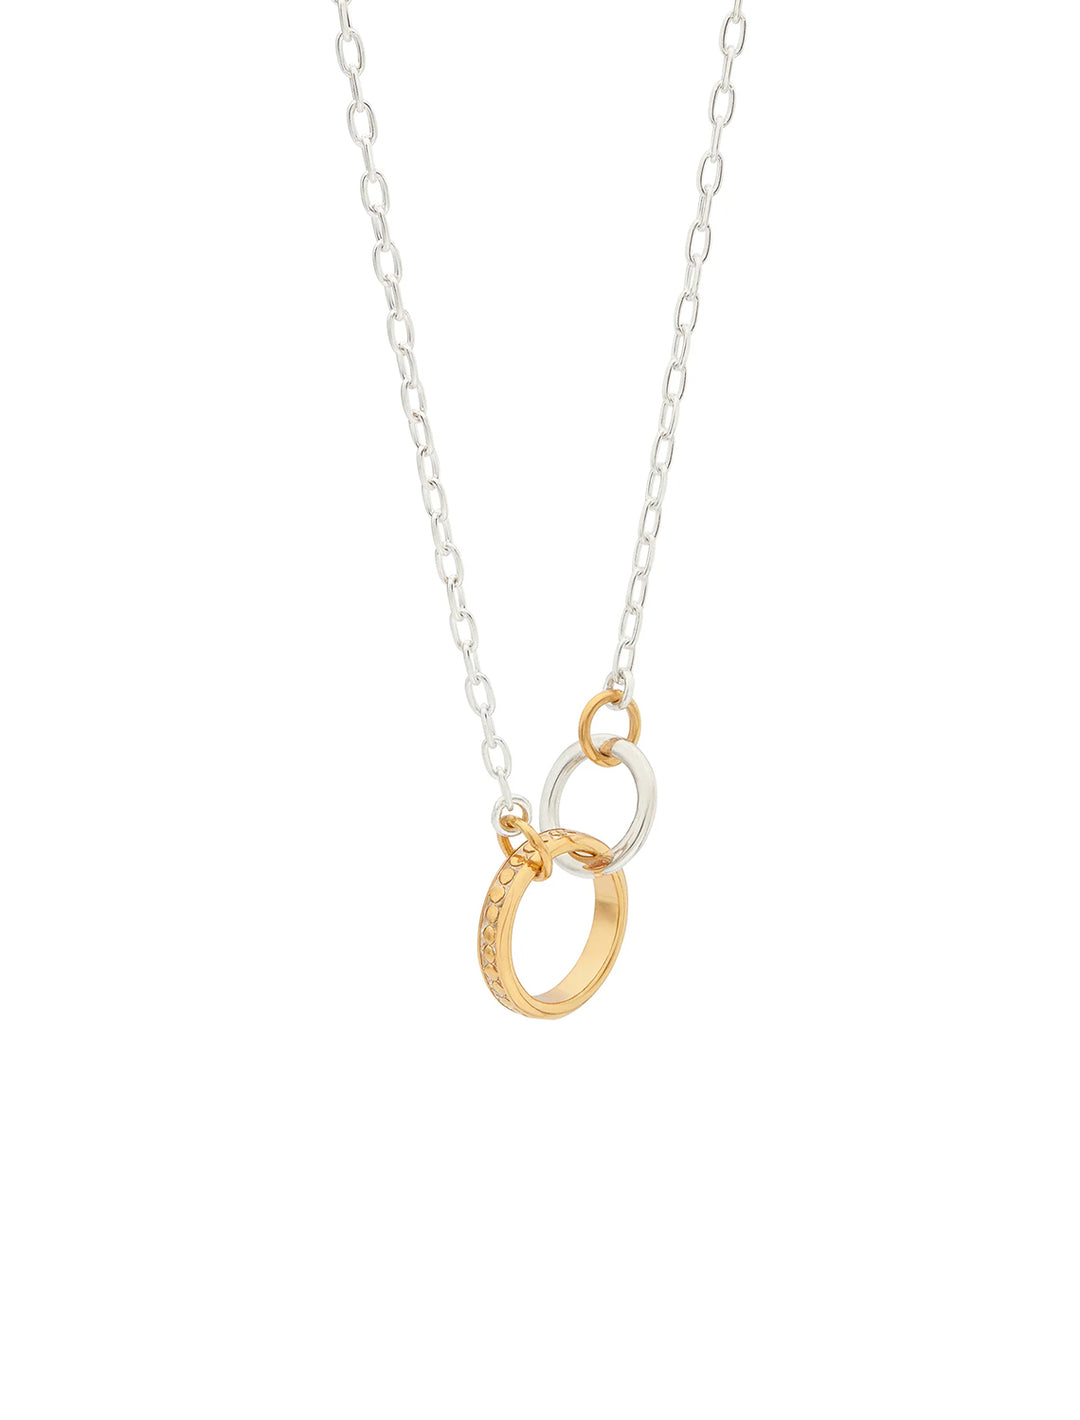 intertwined circles charity necklace in two tone (2)